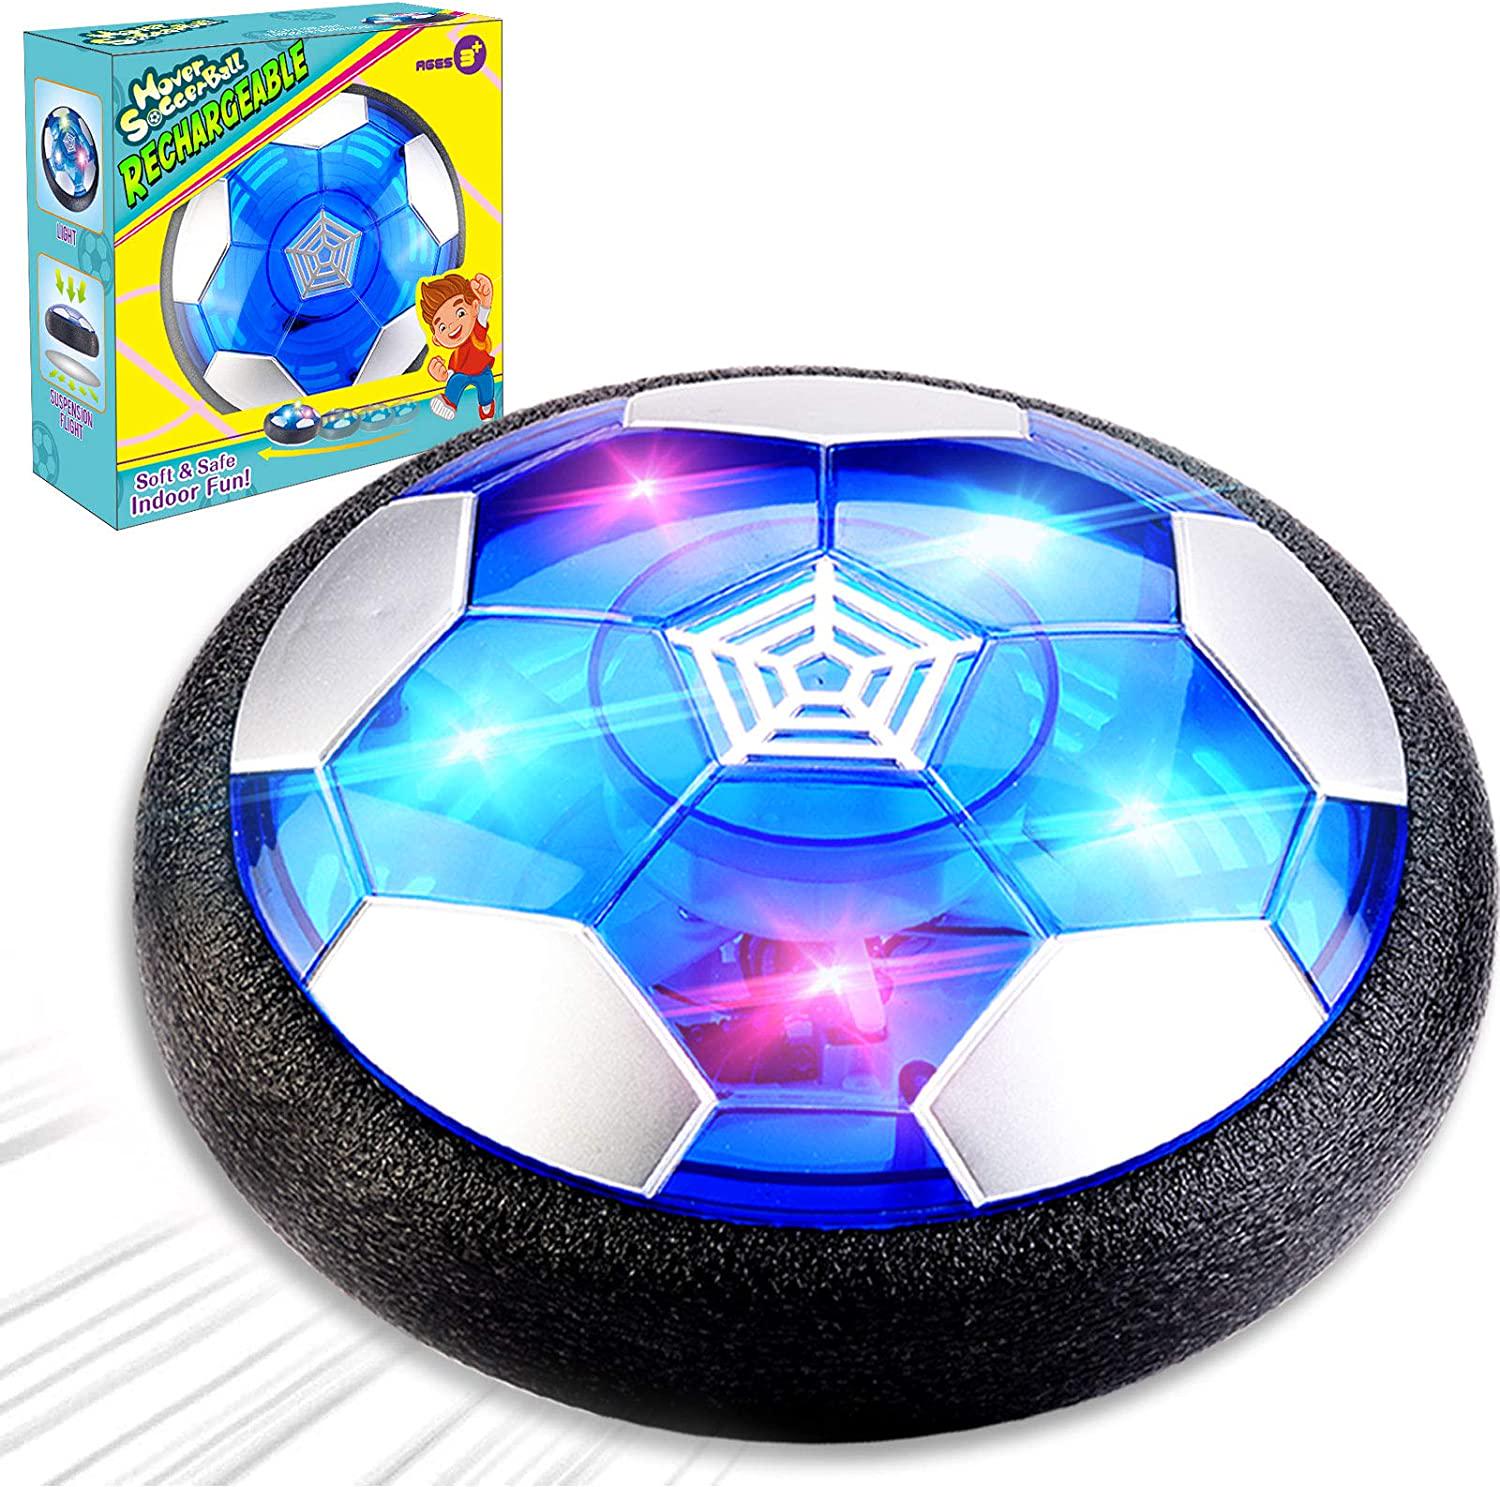 Camlinbo, Kids Toys Hover Soccer Ball Rechargeable Air Soccer Ball, Indoor Outdoor Soccer Ball Floating Soccer with Beautiful LED Light and Foam Bumper,Boys Girls Age 2, 3, 4,5,6,7,8-16 Year Old